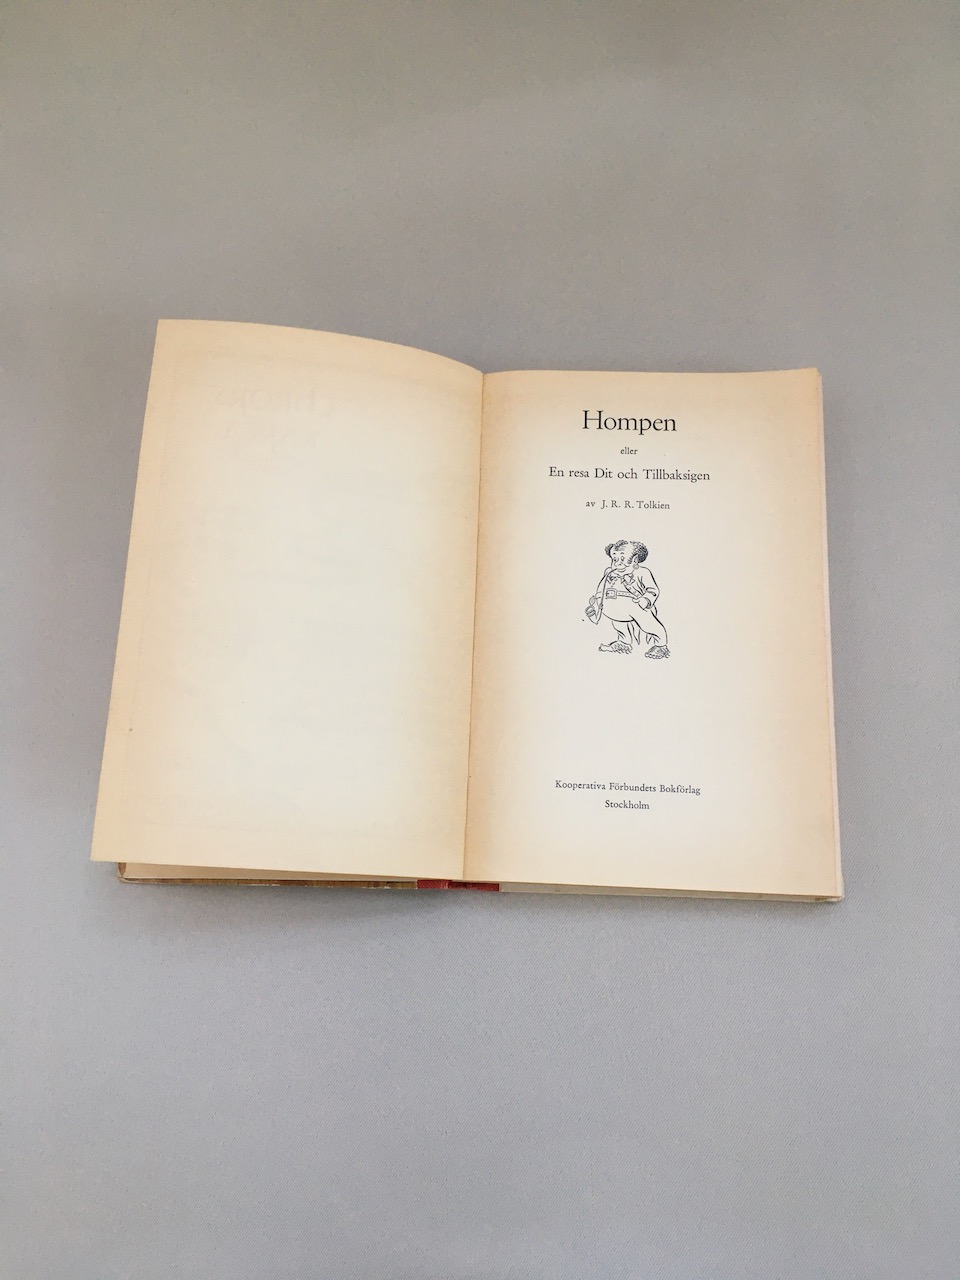 Hompen, 1947, first Swedish edition - first translation of The Hobbit into any language 13